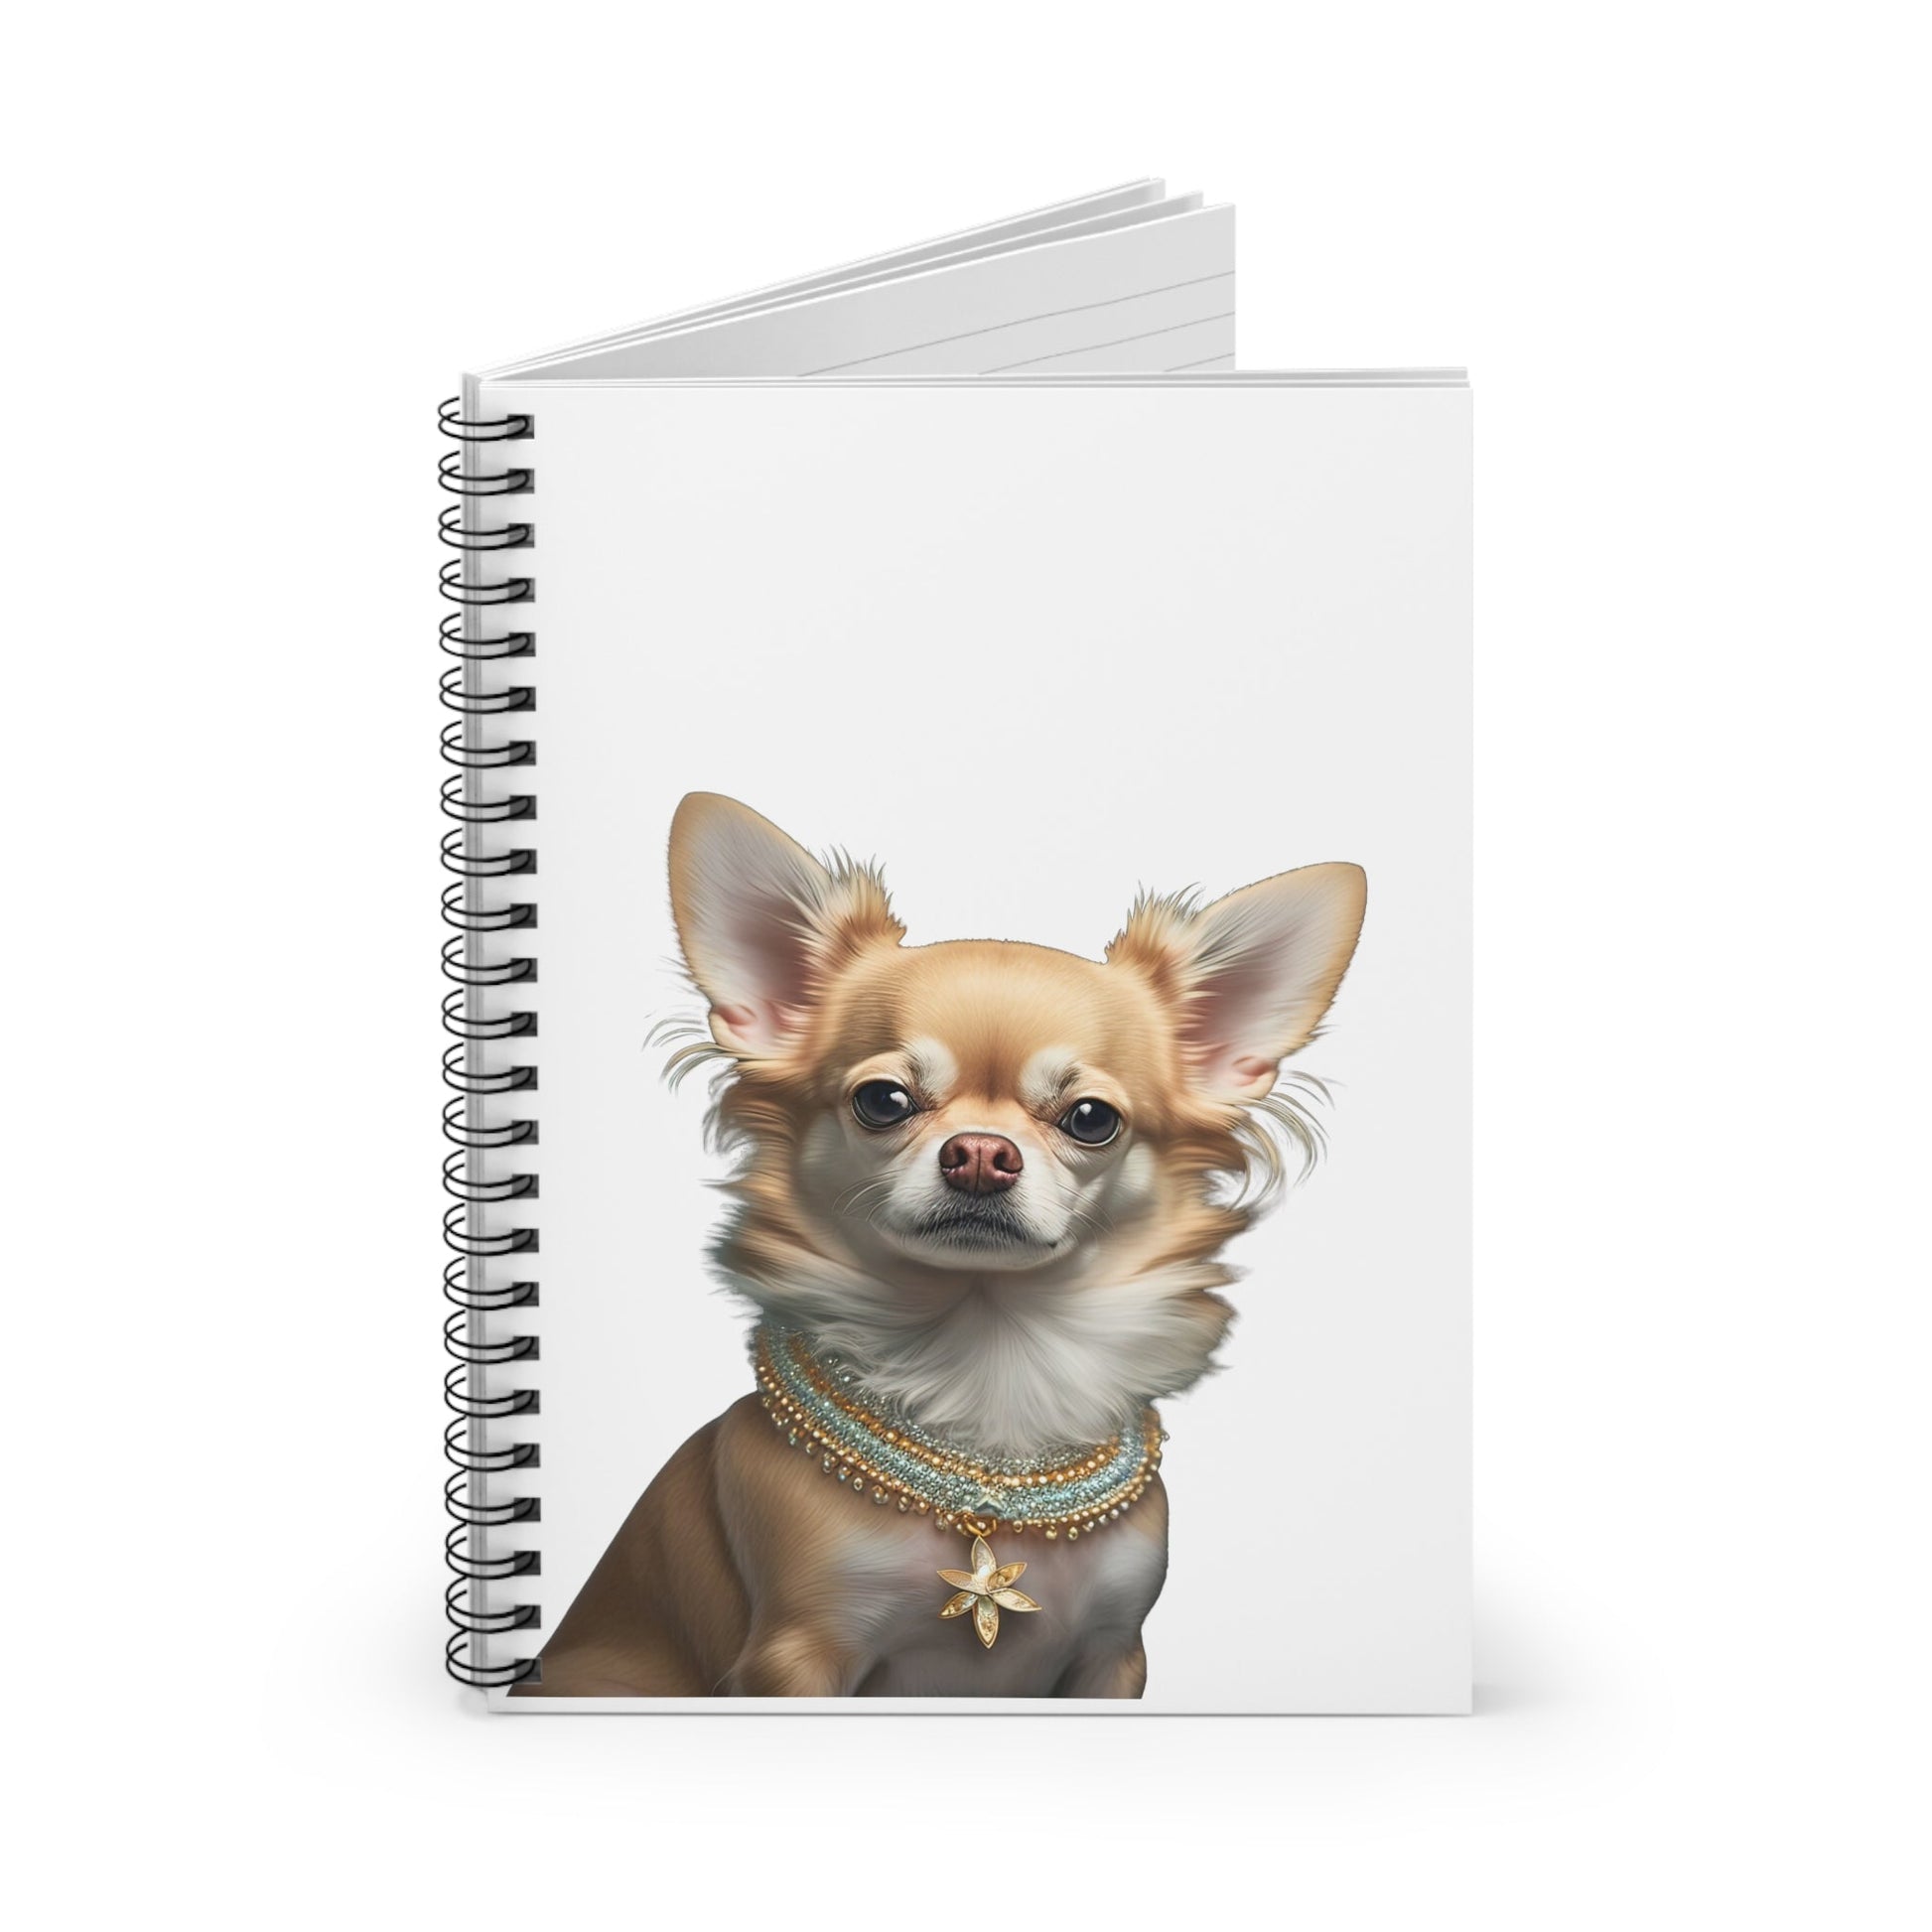 LEONRA : Spiral Notebook - Ruled Line - Shaggy Chic